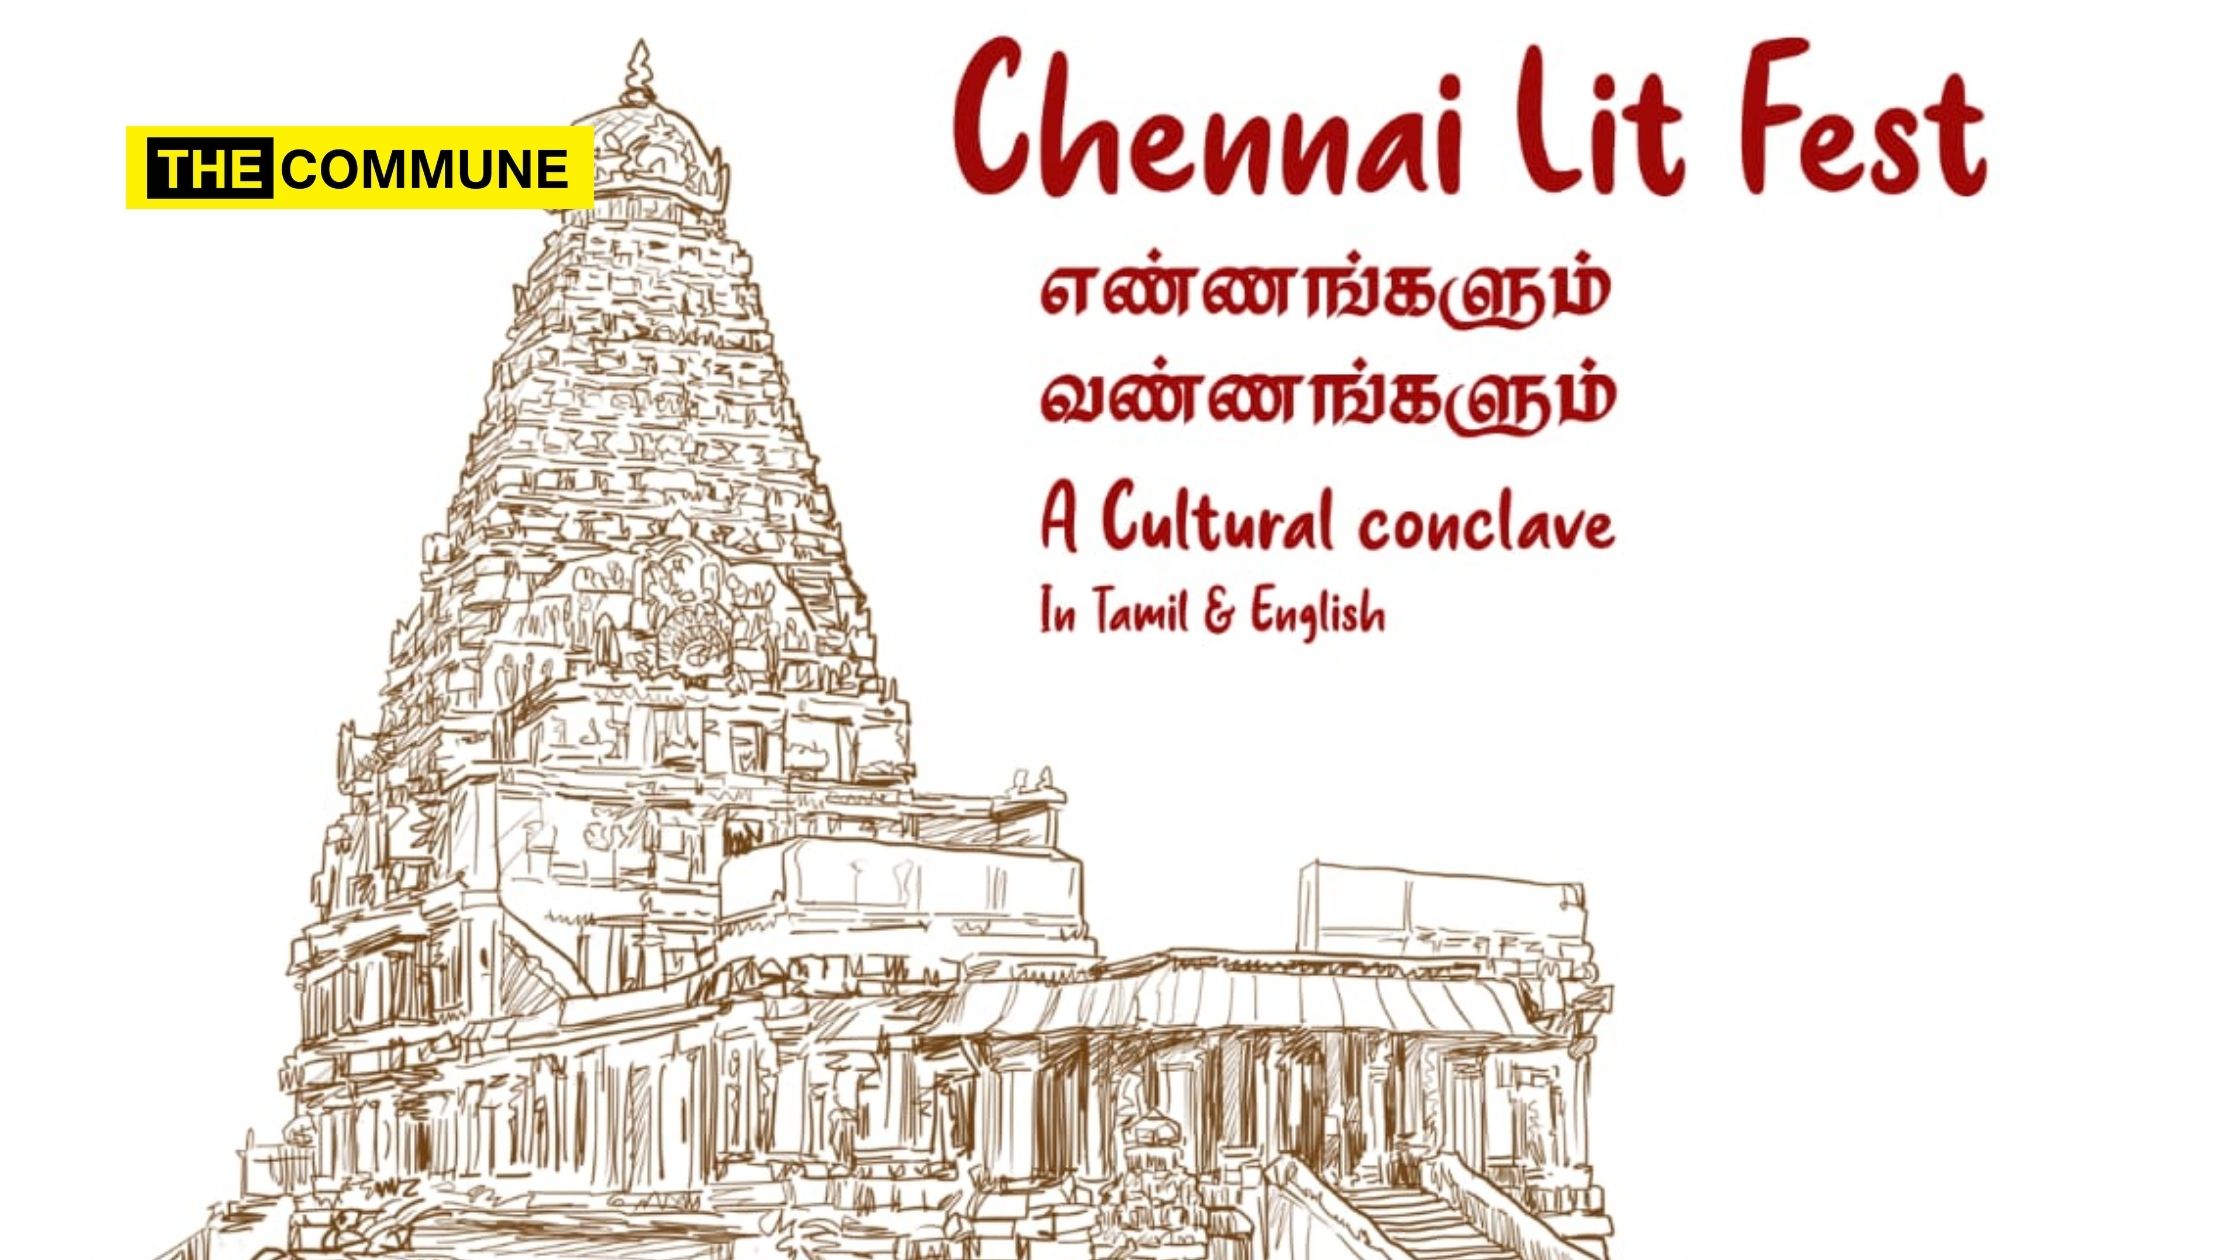 Chennai lit fest organised by Indoi Analytics to take place on March 26